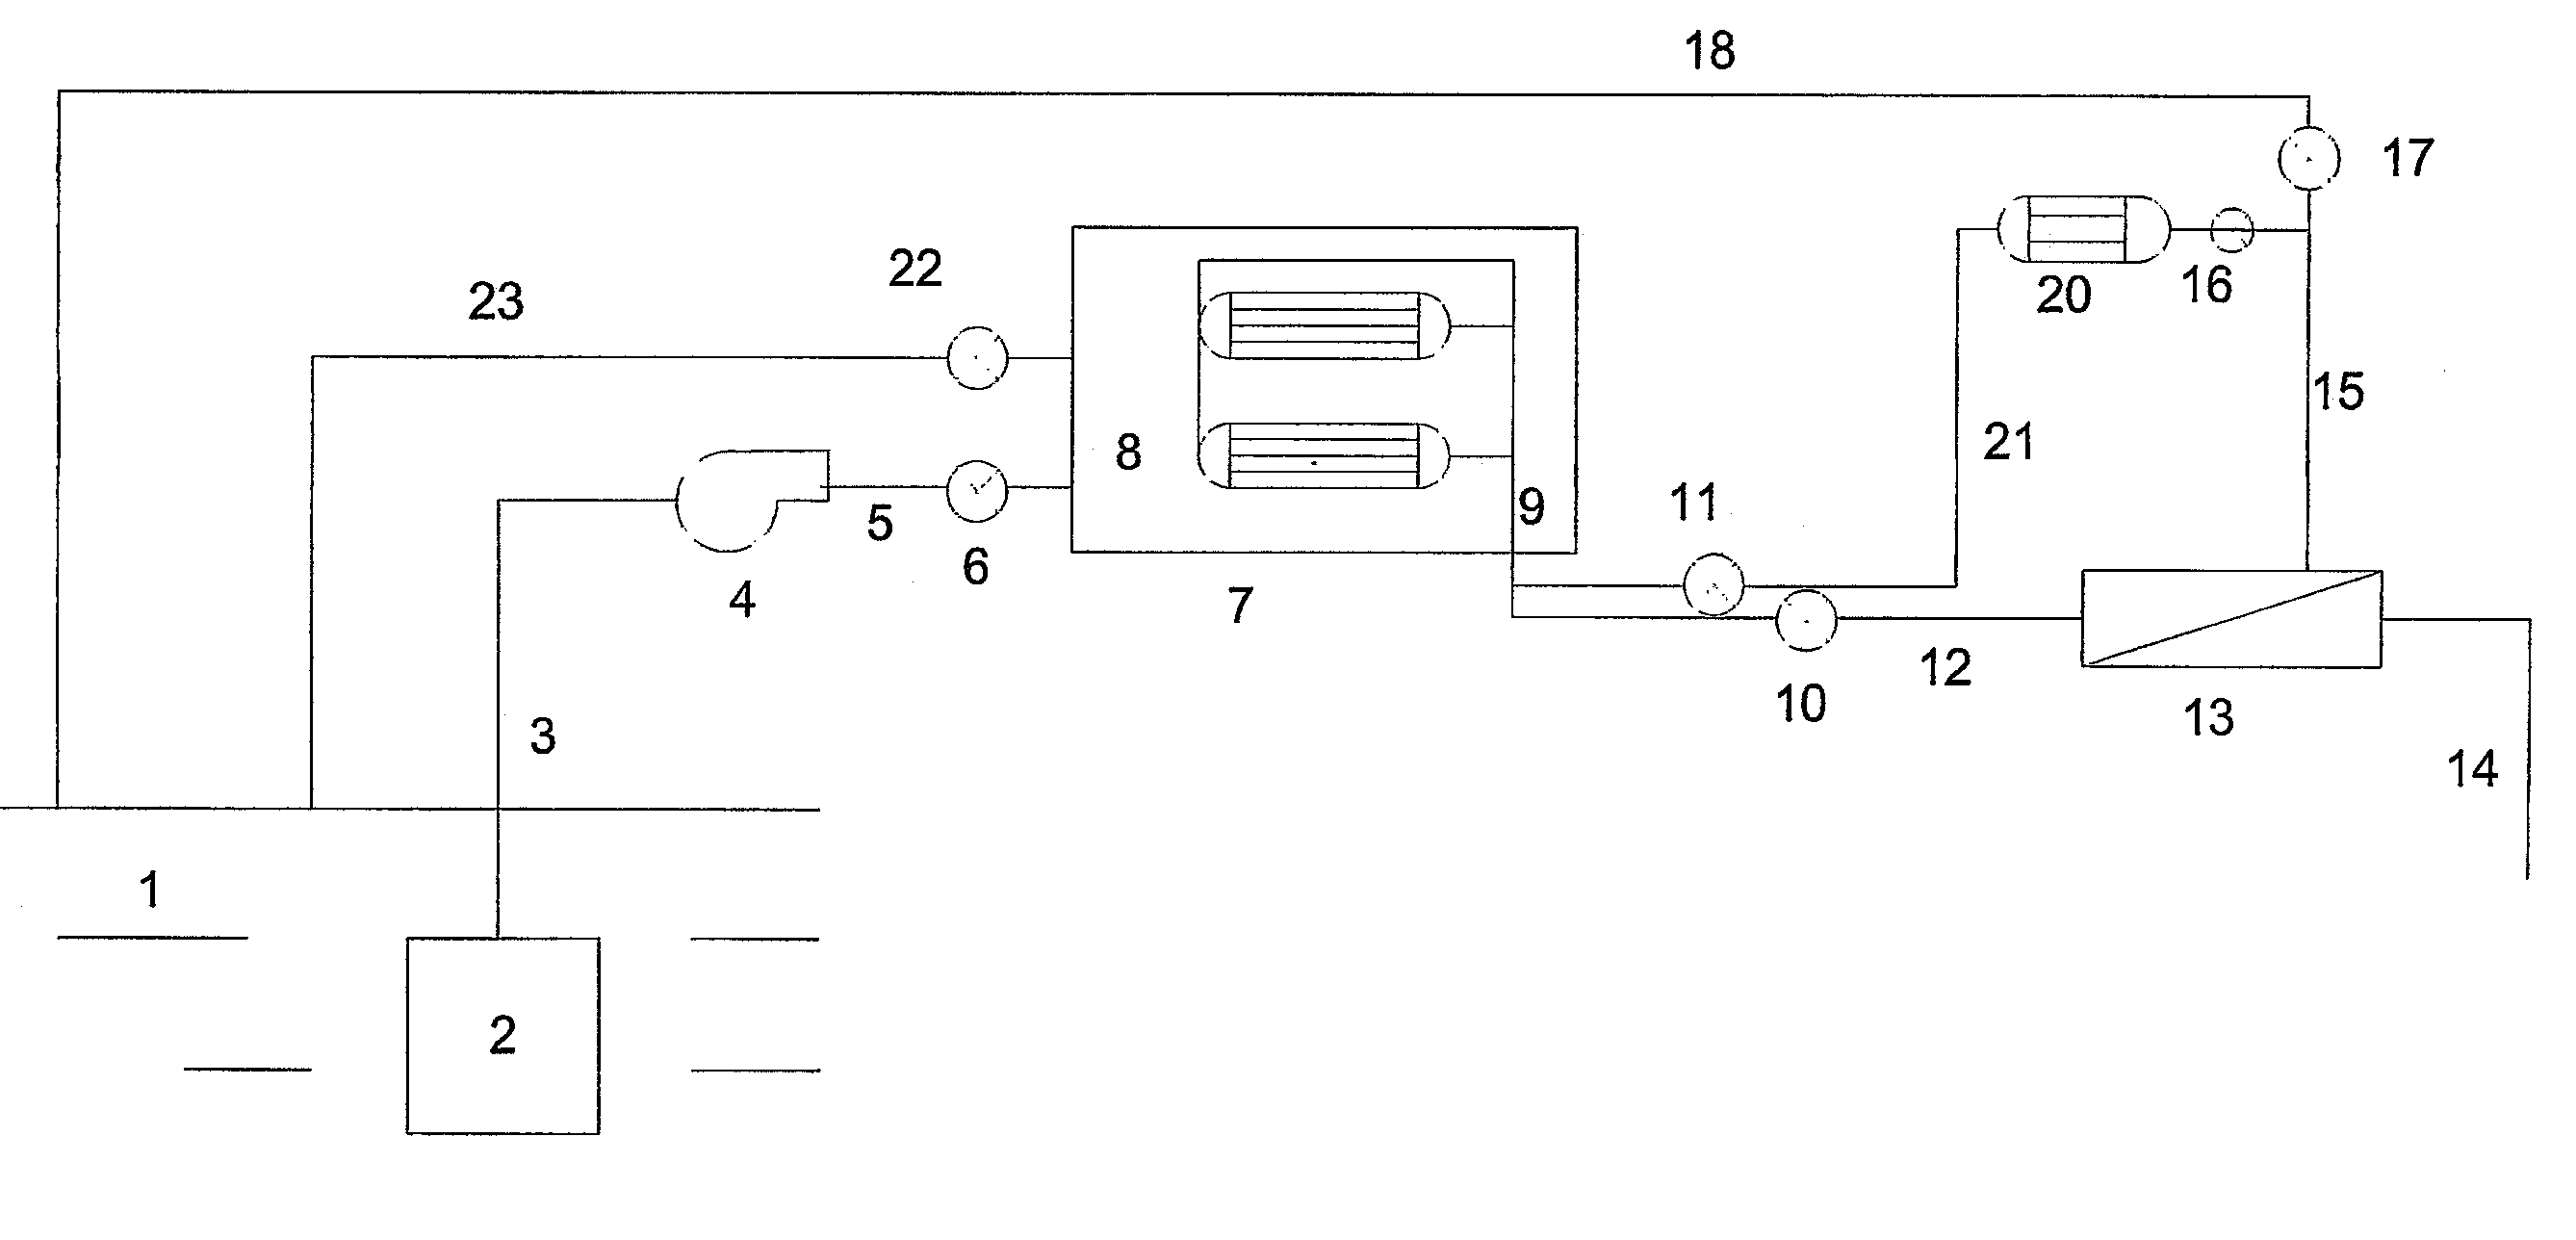 Process and apparatus for purifying impure water using microfiltration or ultrafiltration in combination with reverse osmosis